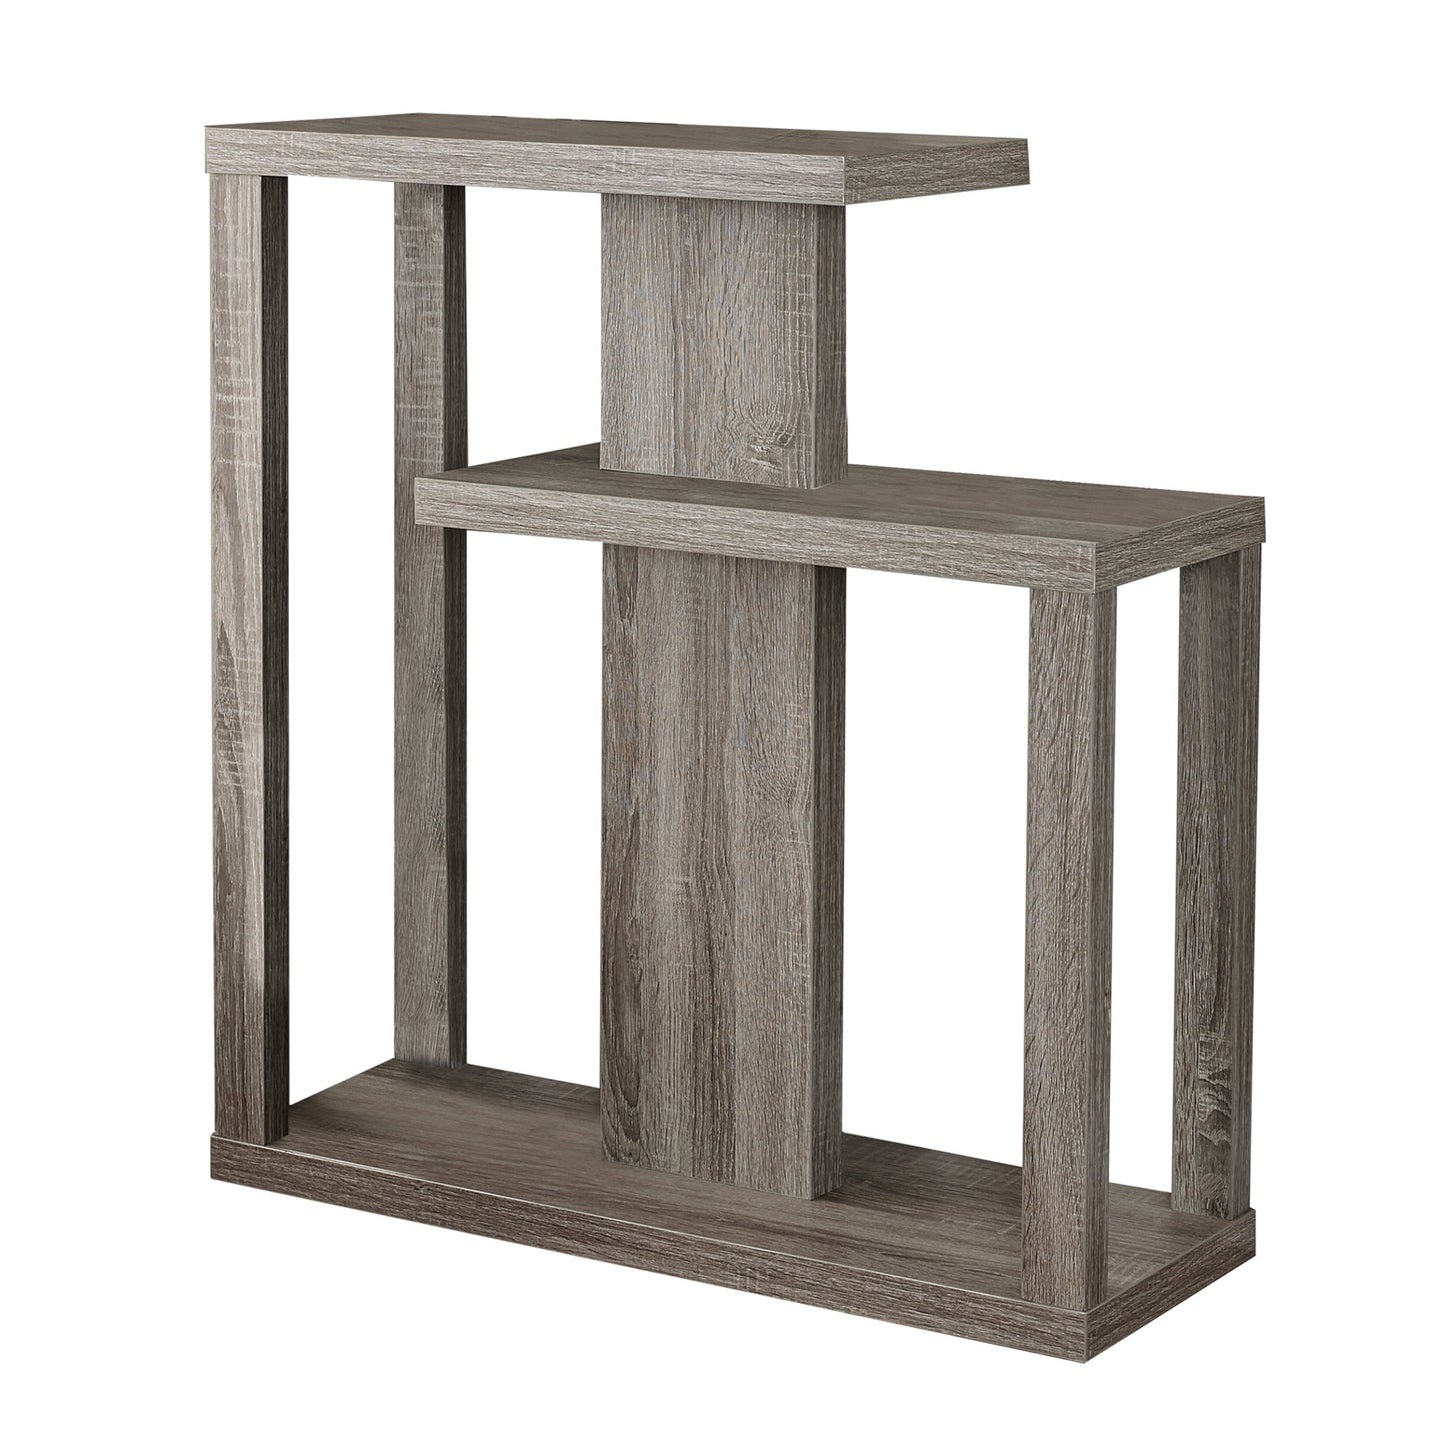 11.75" x 31.5" x 34" Dark Taupe Finish Hall Console Accent Table